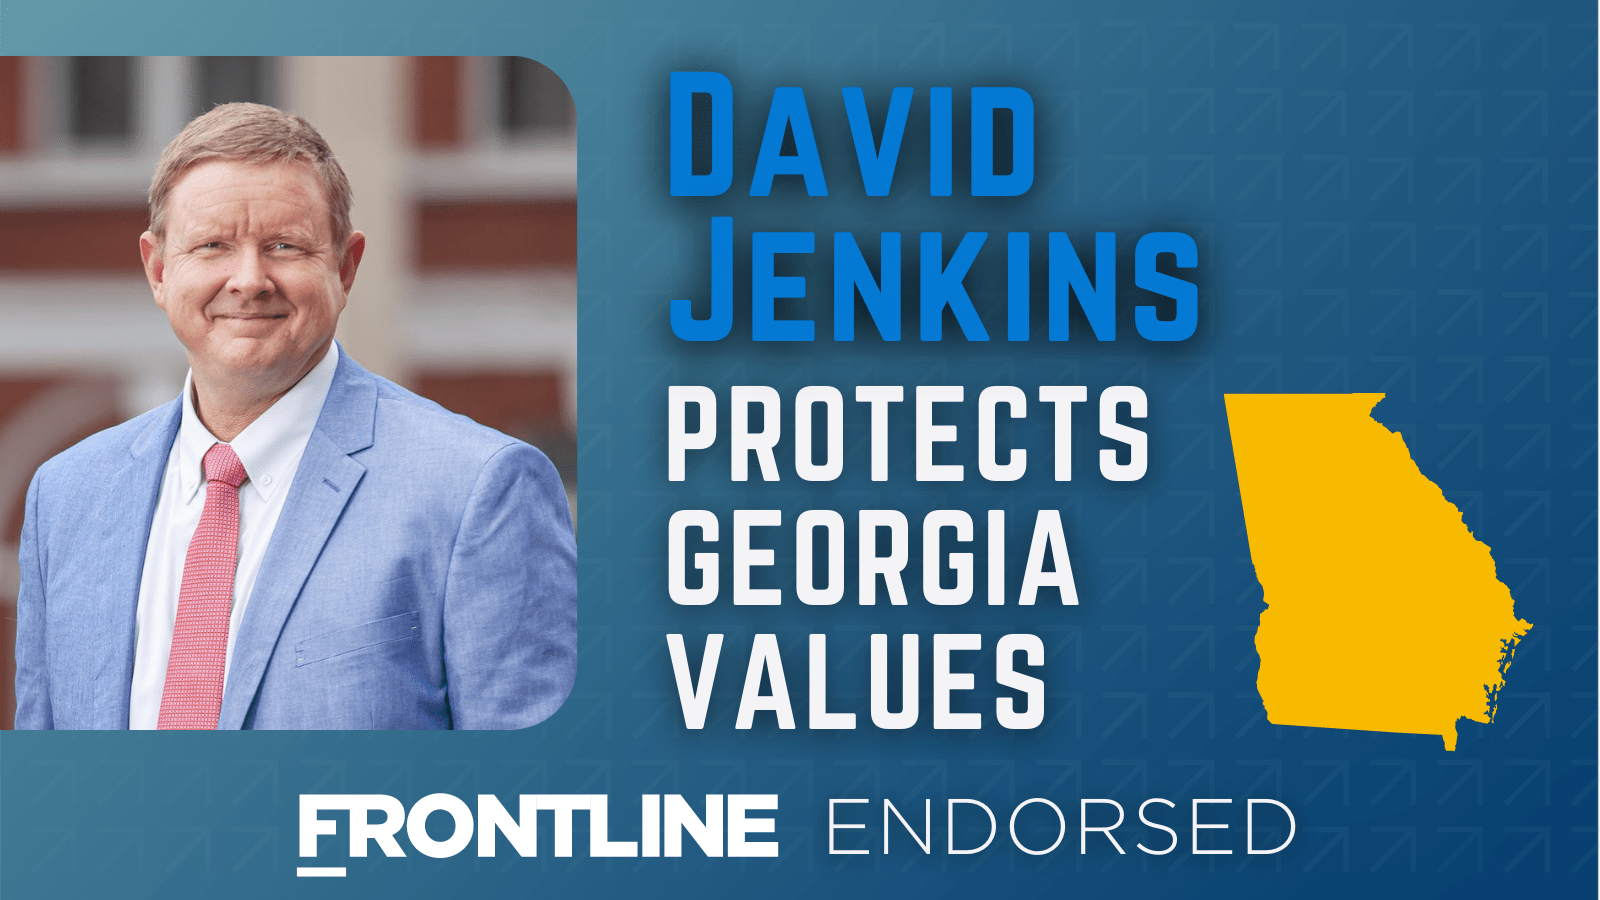 Reminder – Vote for David Jenkins for State House District 136